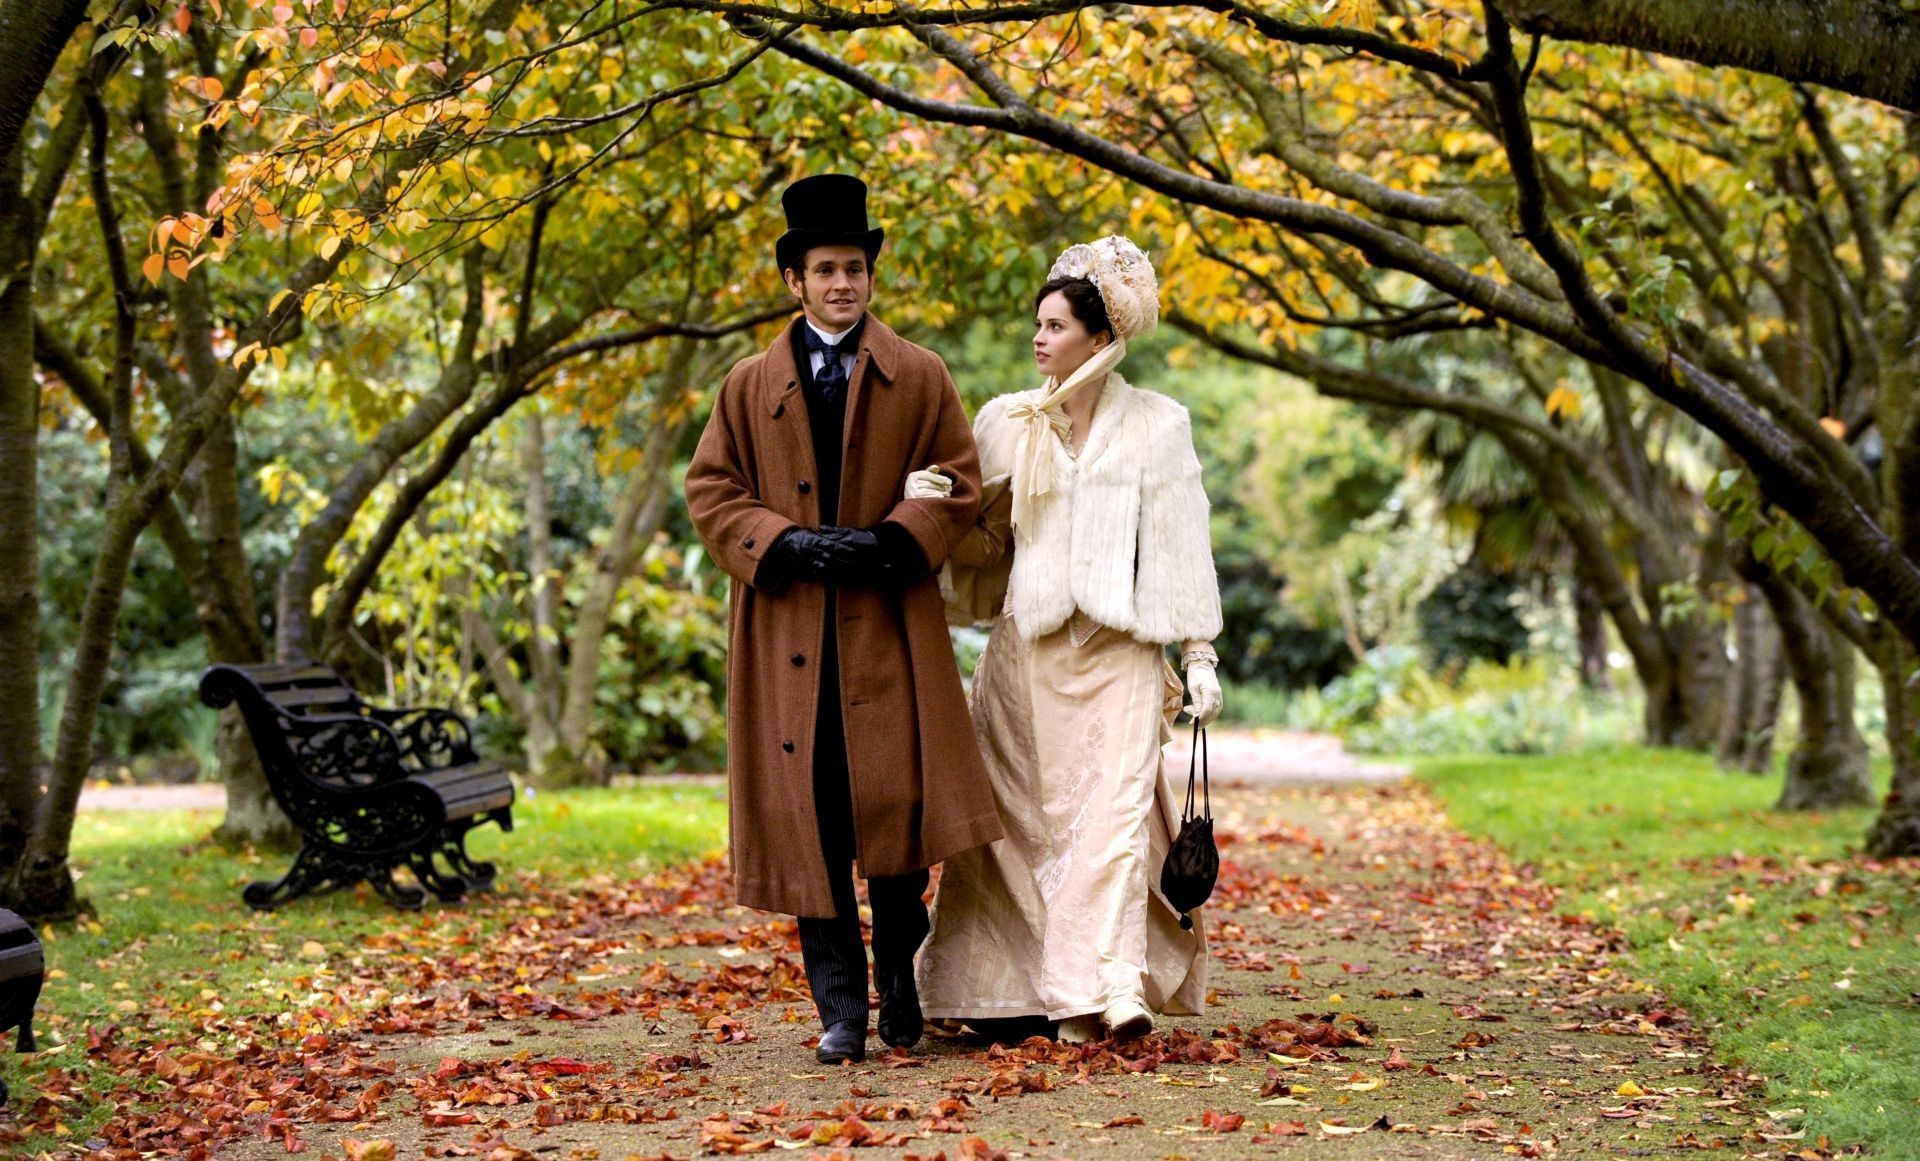 Hugh Dancy stars as Dr. Mortimer Granville and Felicity Jones stars as Emily Dalrymple in Sony Pictures Classics' Hysteria (2012). Photo credit by Liam Daniel.